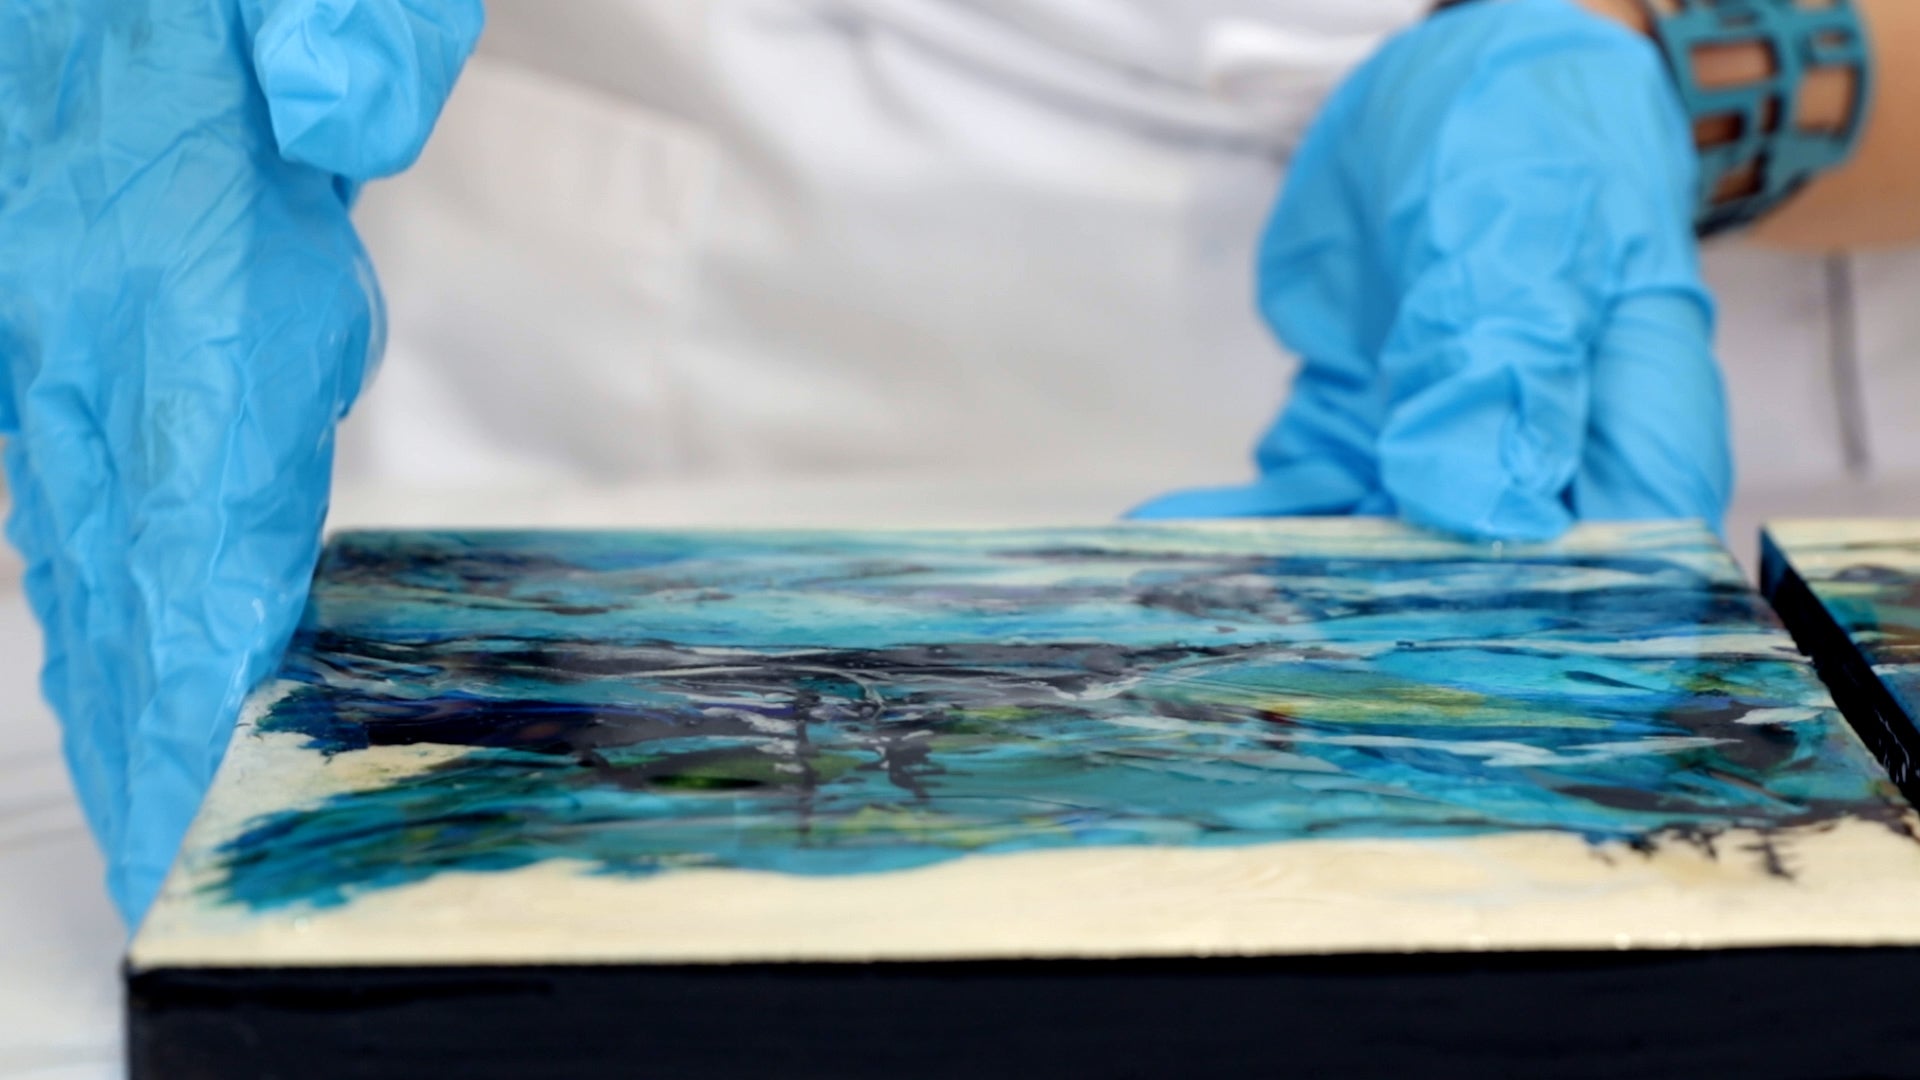 use a gloved hand to spread resin over the edges of the panel